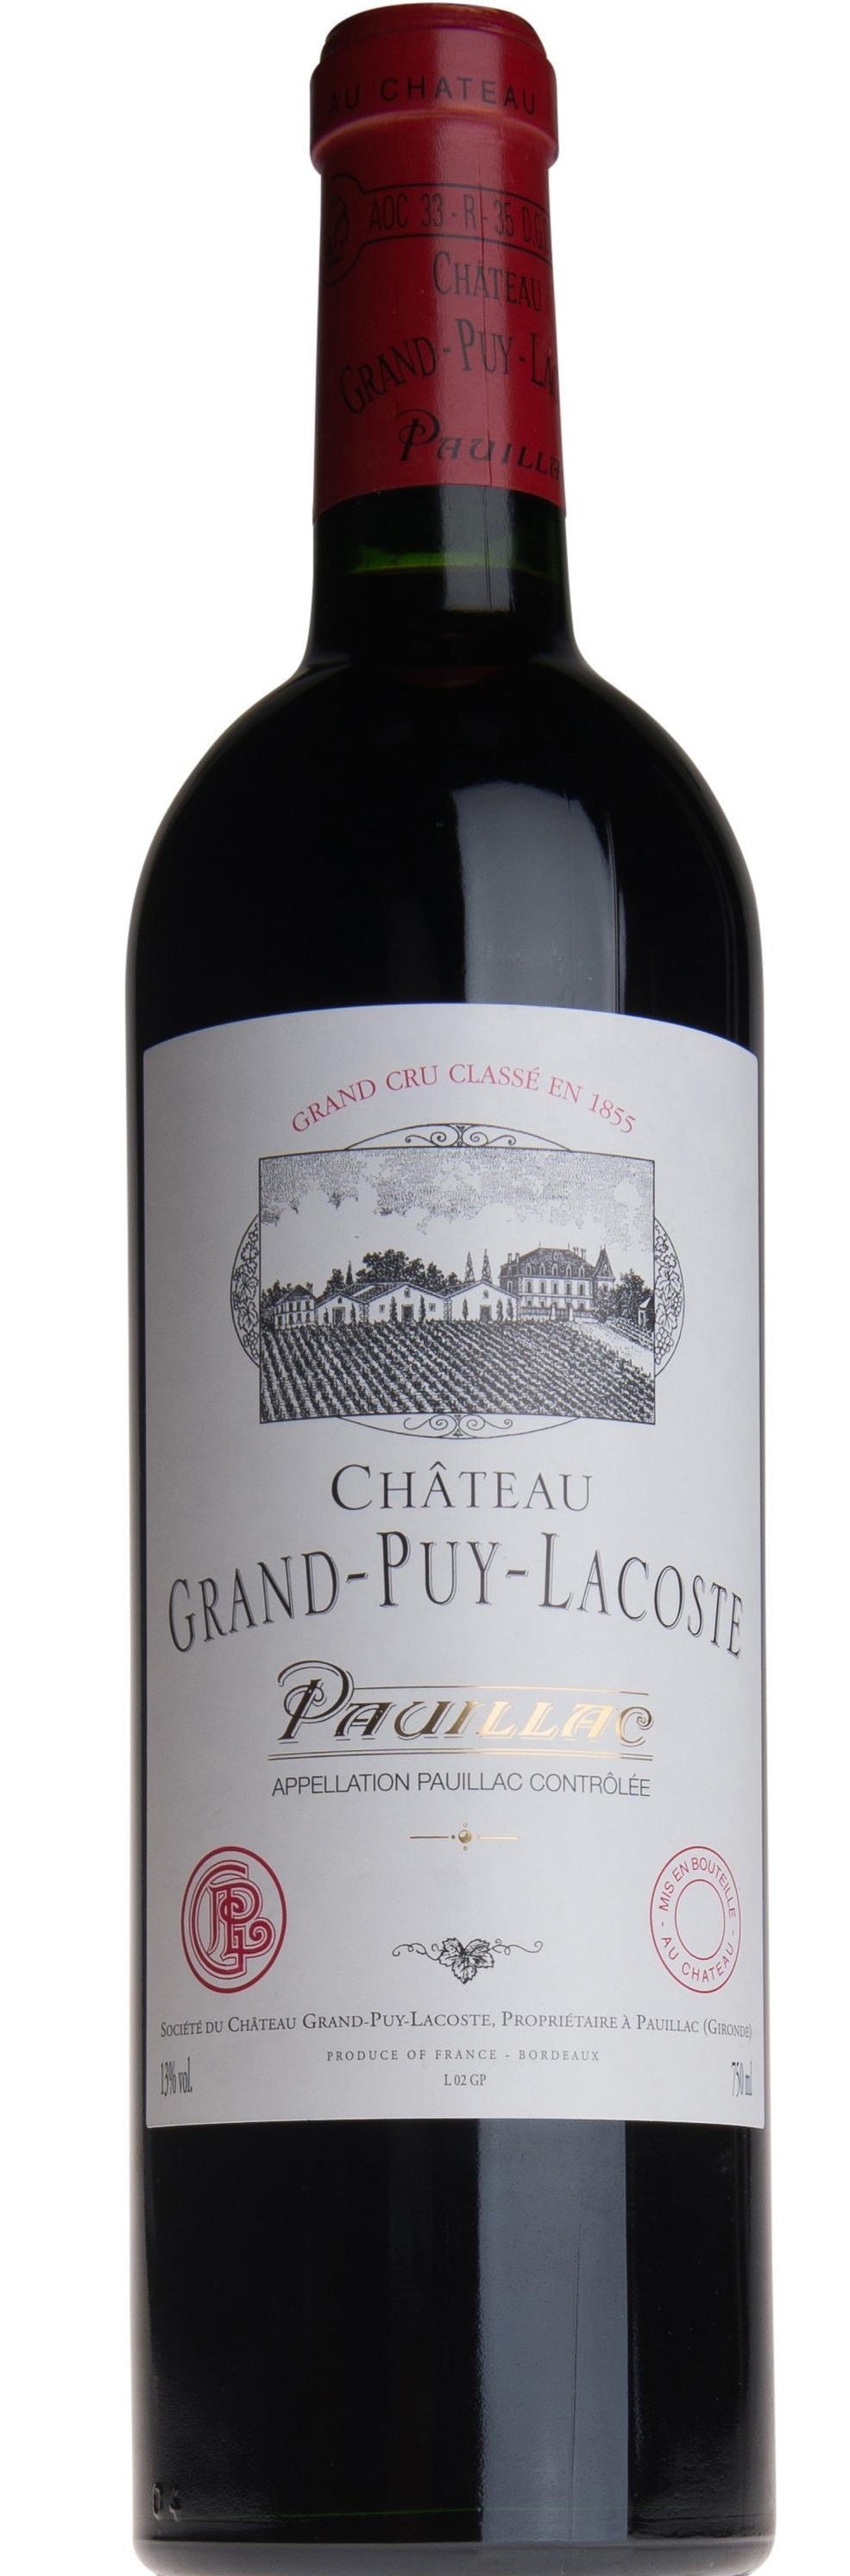 Grand-Puy-Lacoste Pauillac – Wine Chateau